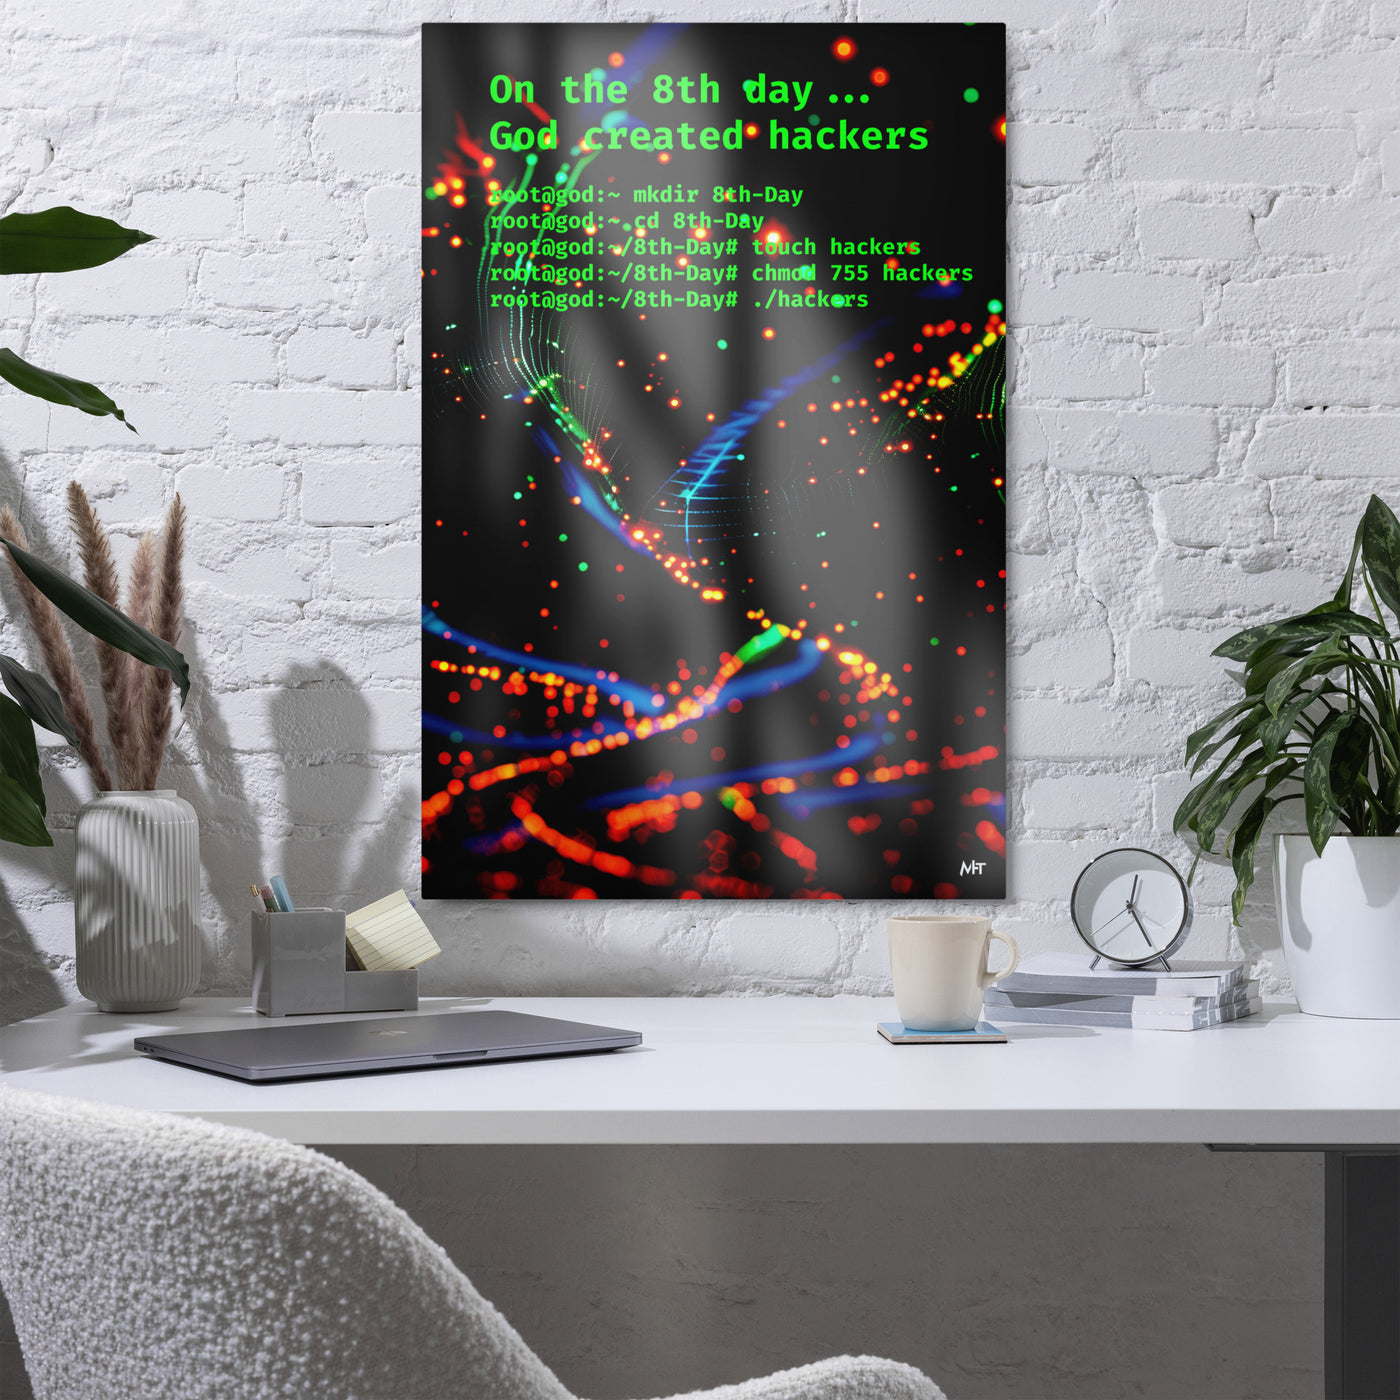 On the 8th day God created hackers - Metal prints